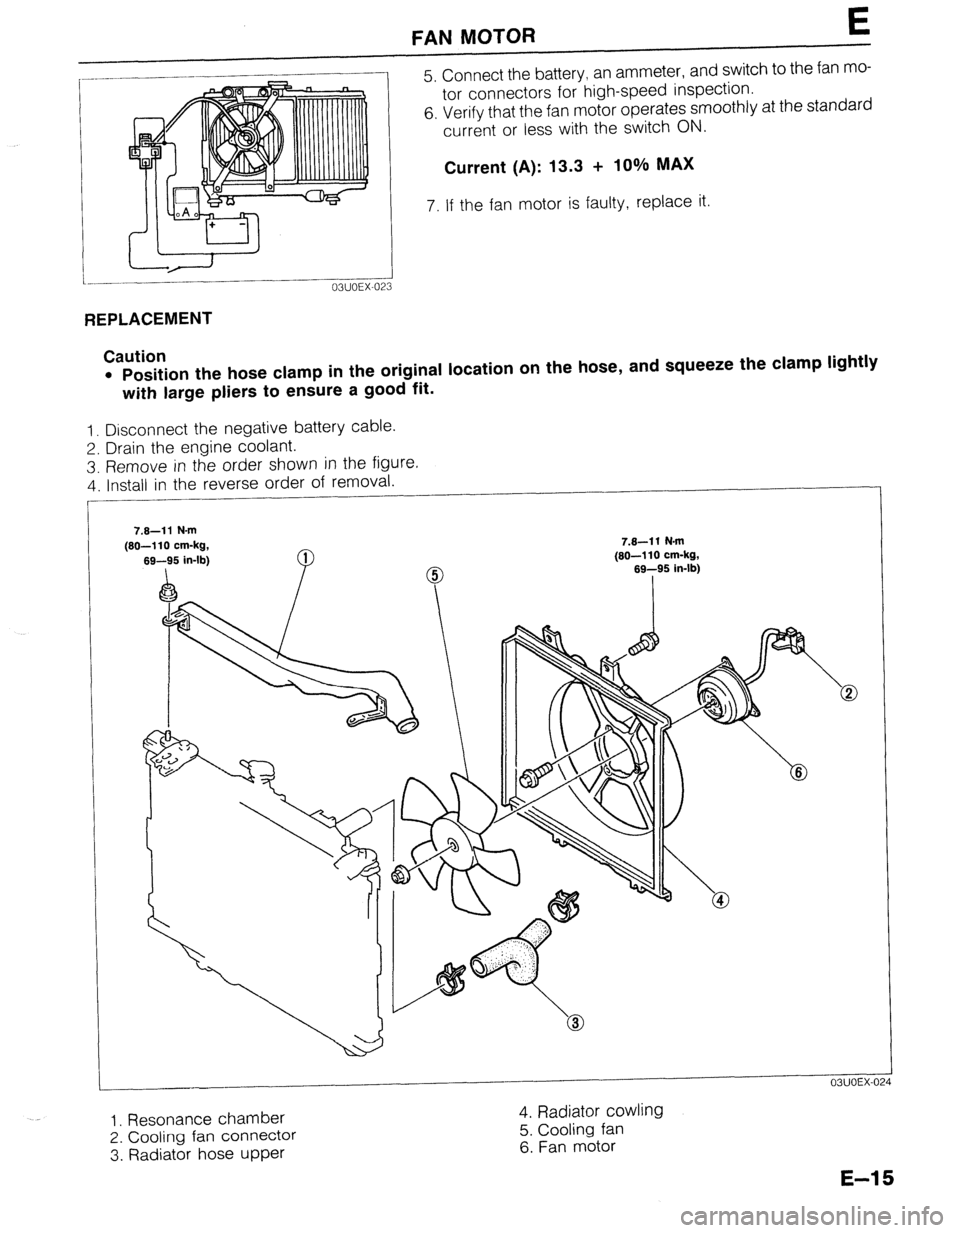 MAZDA 323 1989  Factory Repair Manual FAN MOTOR E 
I- 
i.- 5. Connect the battery, an ammeter, and switch to the fan mo- 
tor connectors for high-speed inspection. 
6. Verify that the fan motor operates smoothly at the standard 
current o